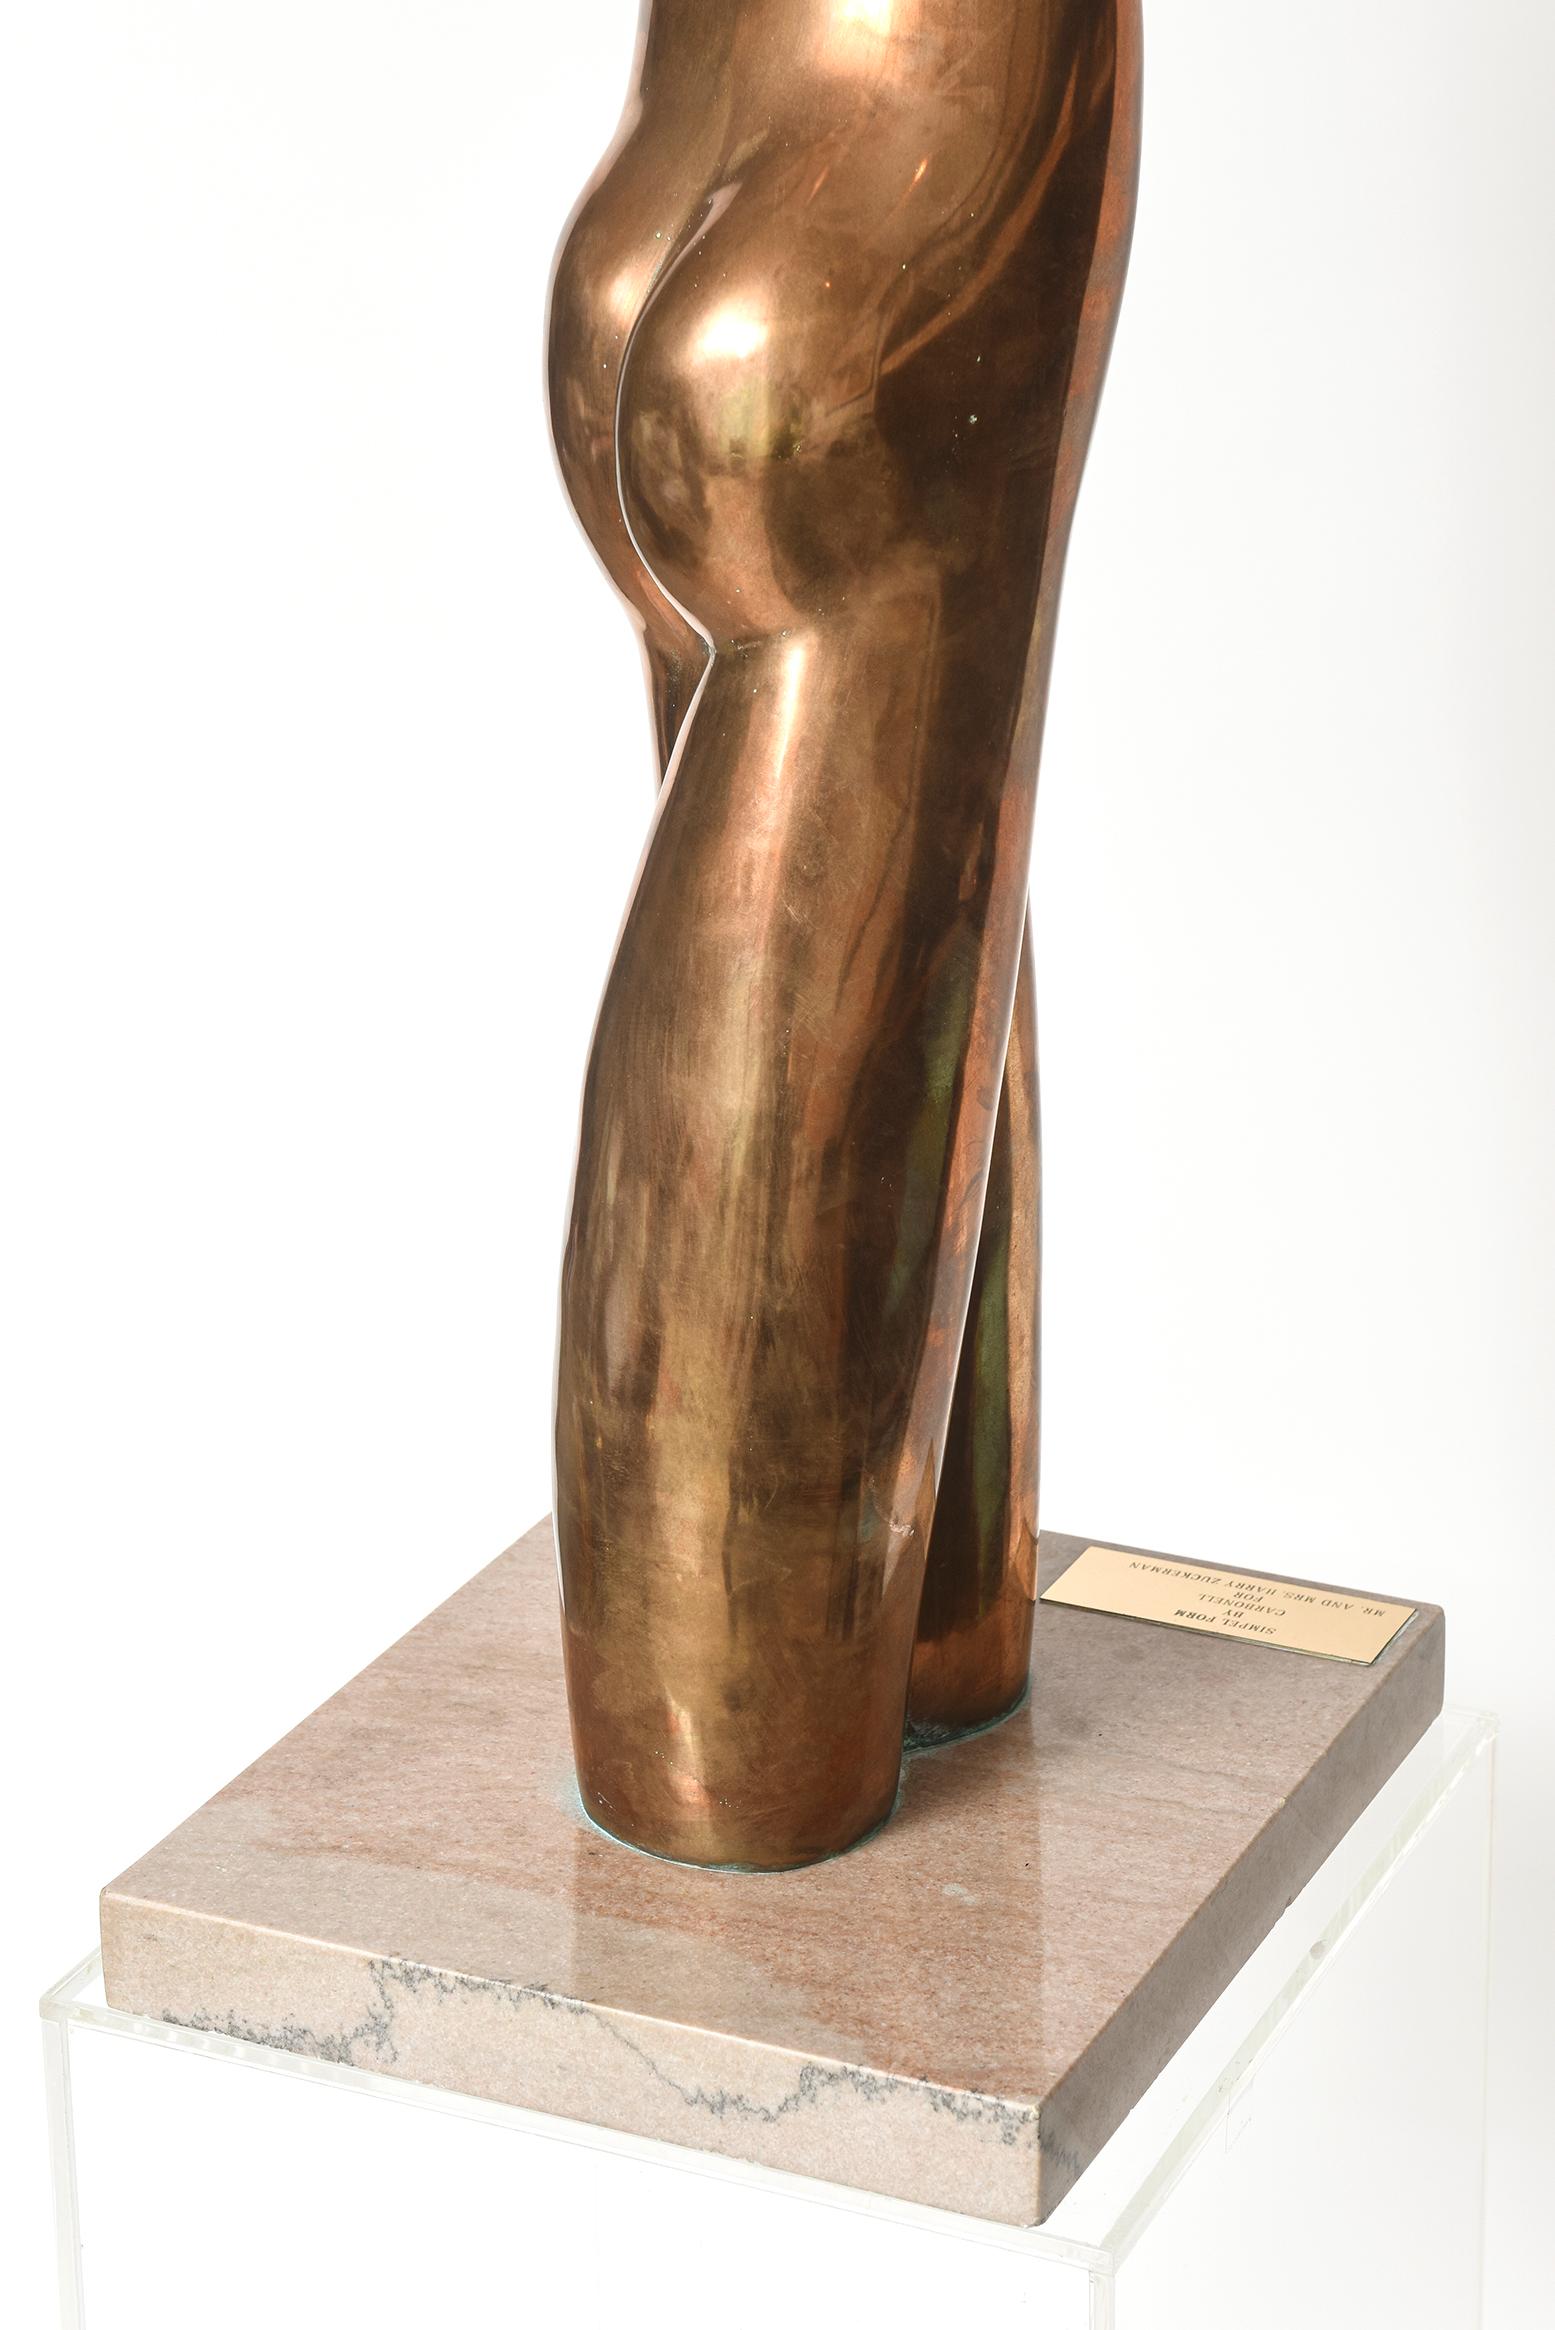 Manuel Carbonell Limited Edition Simple Form Figure Bronze Sculpture, circa 1976 In Good Condition For Sale In Miami Beach, FL